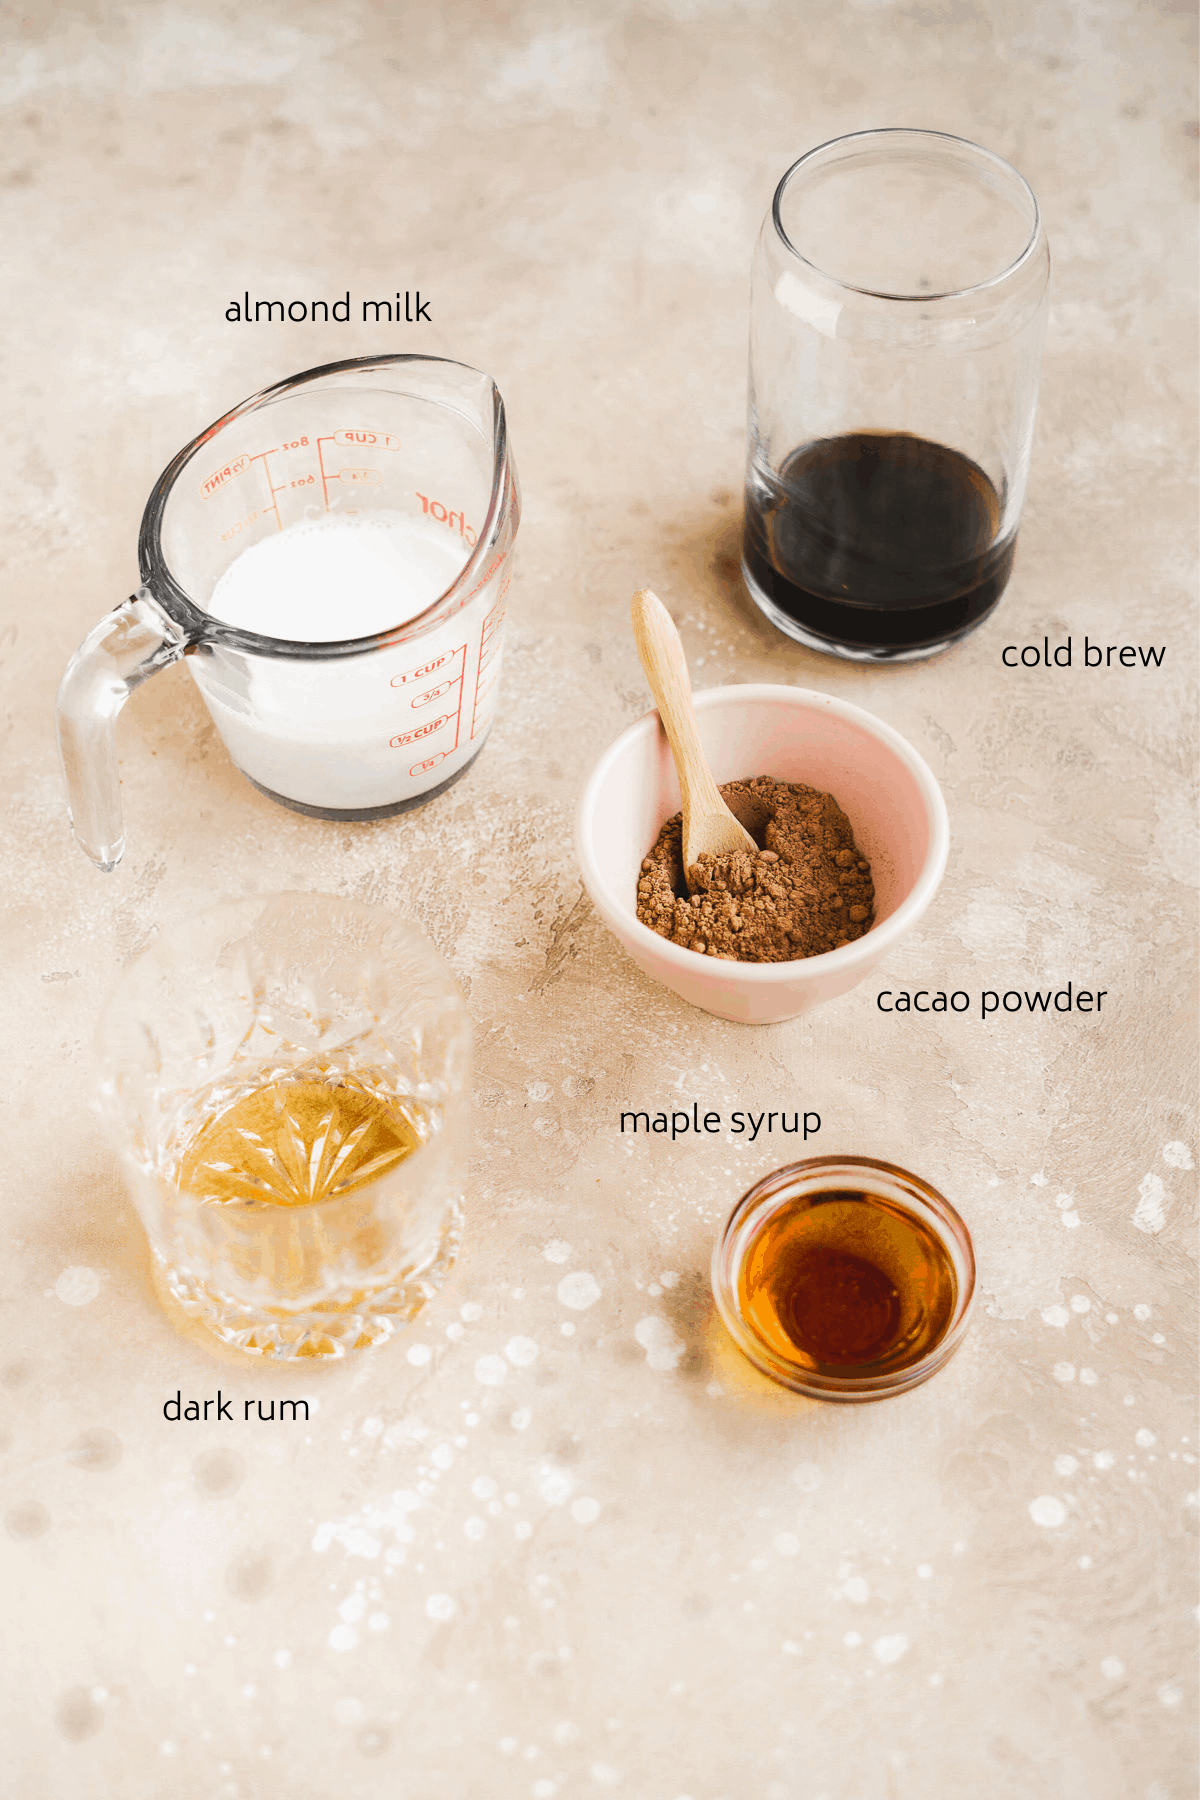 Espresso martini ingredients on a brown surface with labels in black.